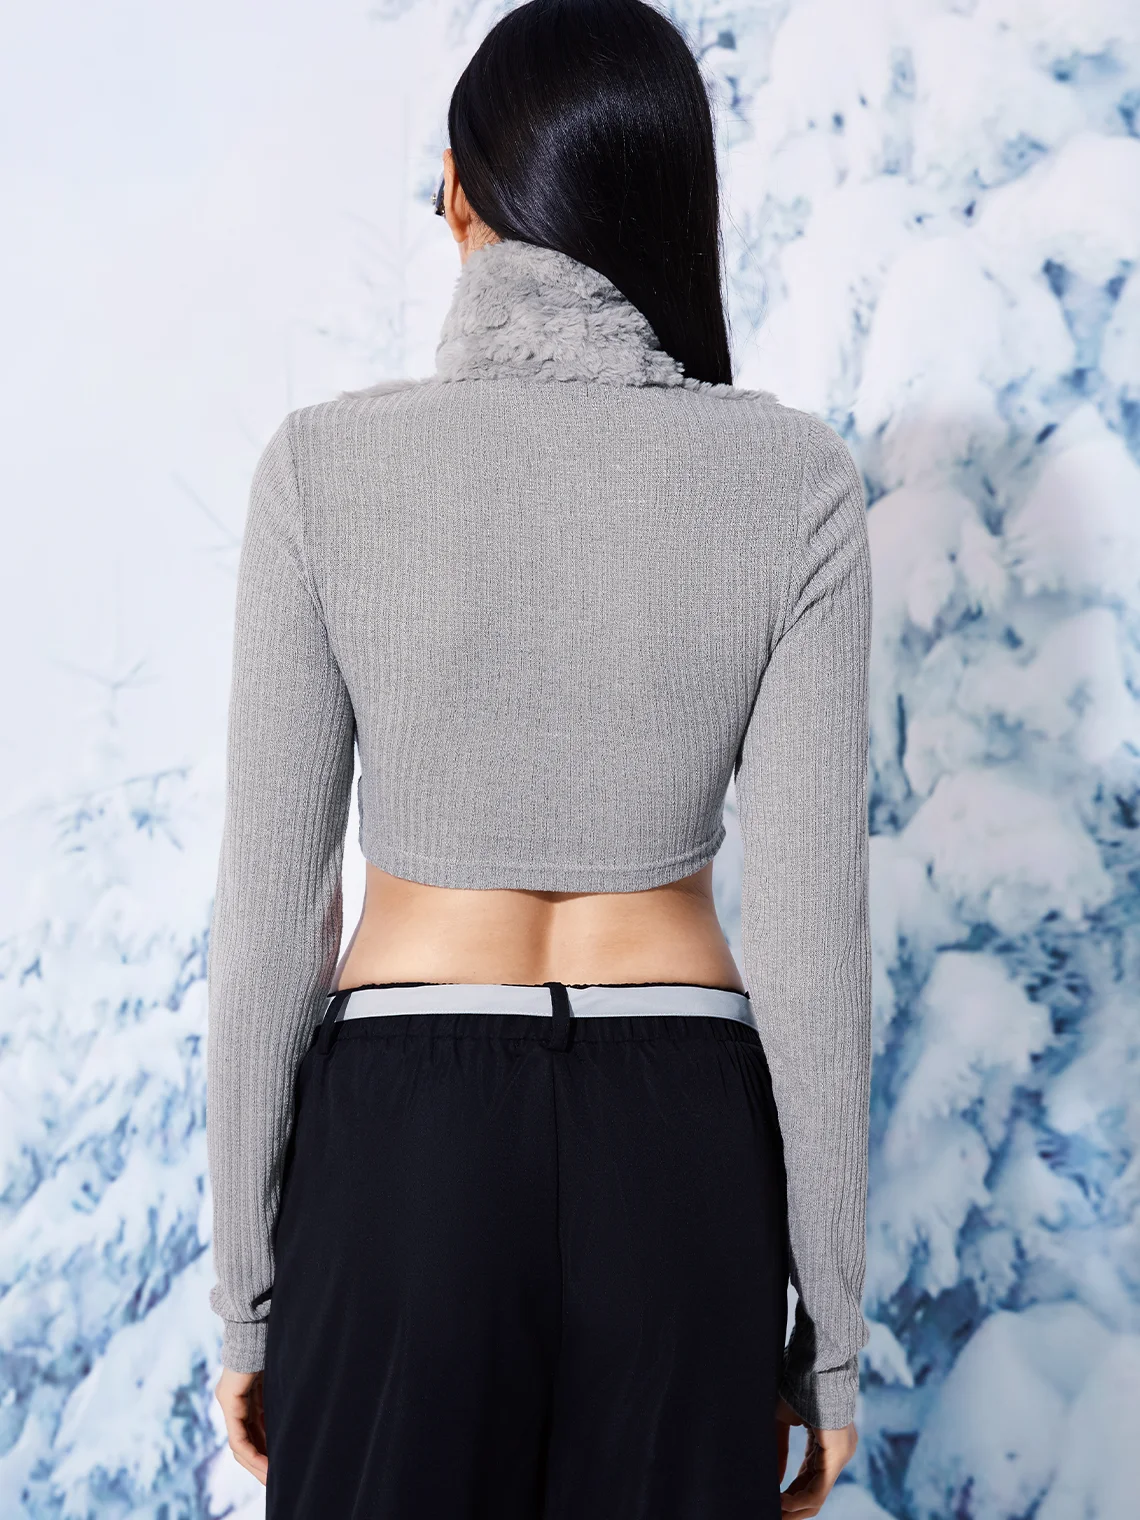 【Final Sale】Fuzzy Patchwork Sherpa Stand Collar Long Sleeve Crop Top